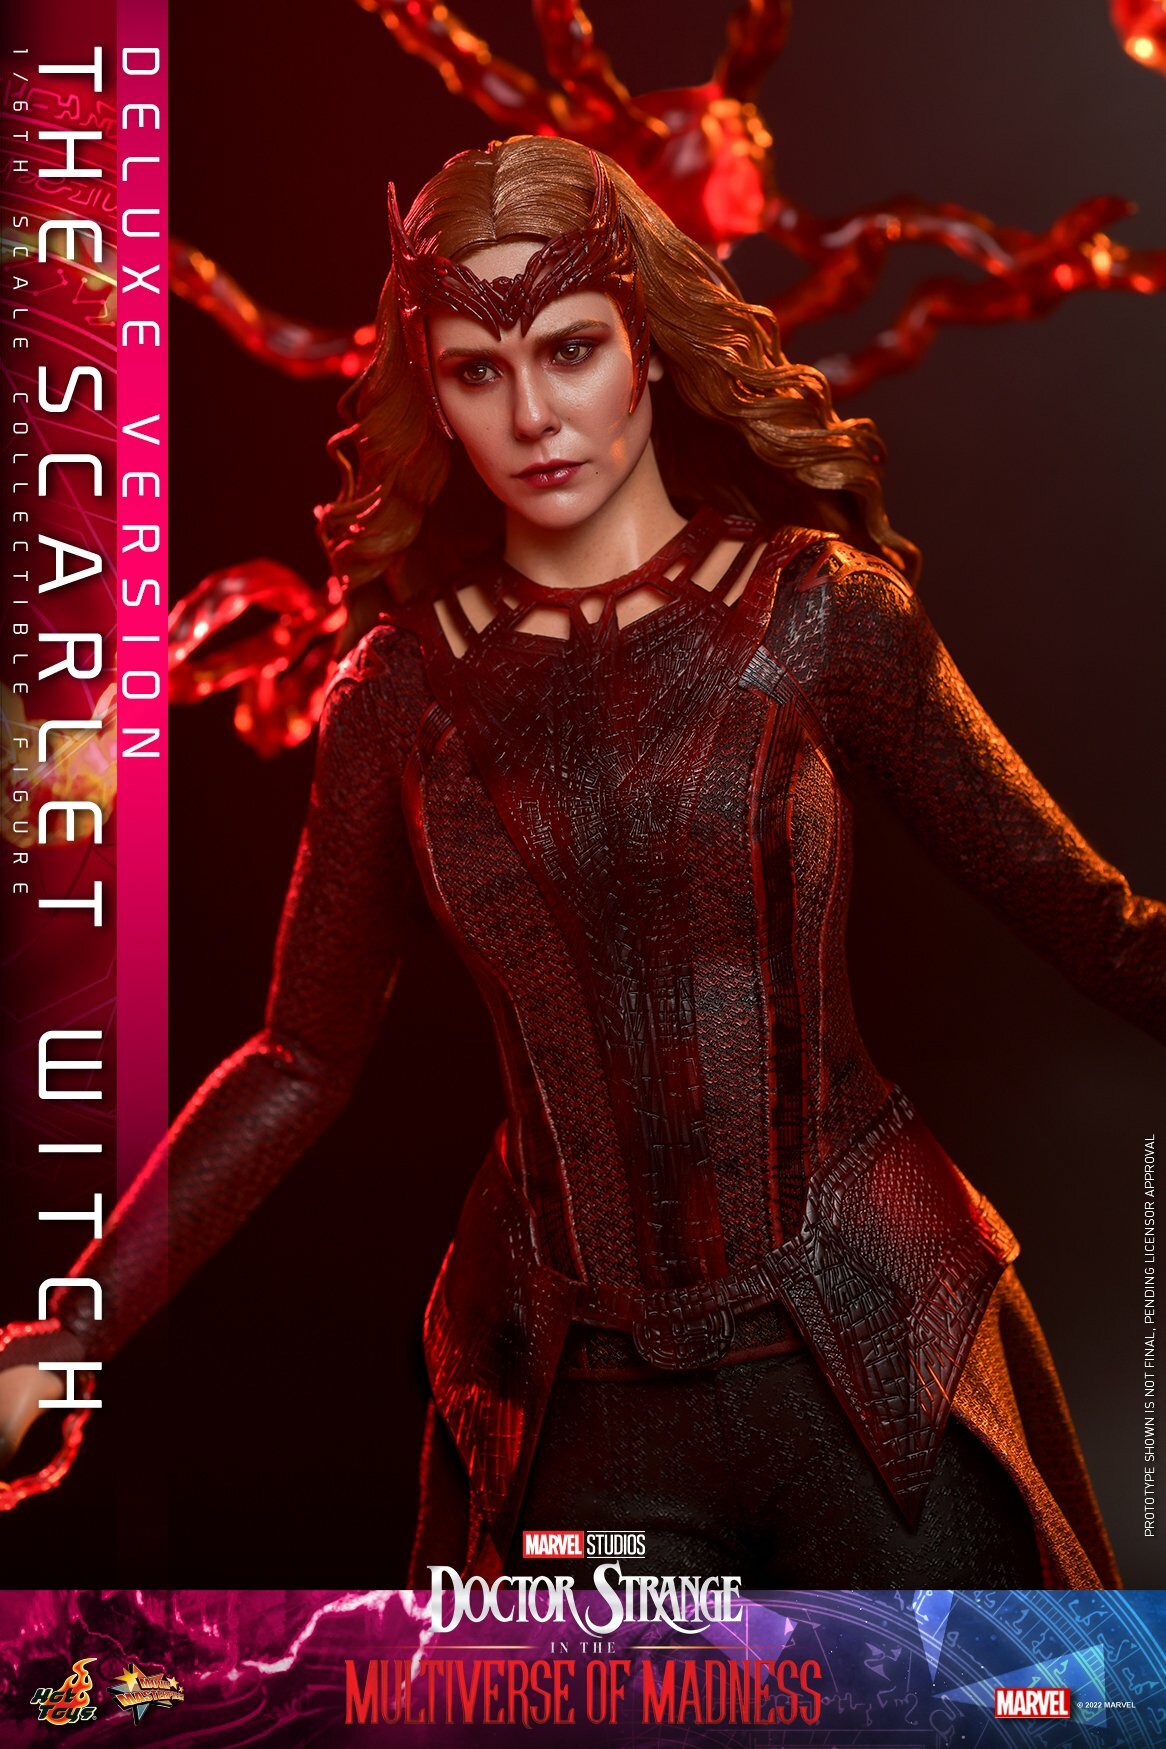 Hot-Toy-Multiverse-of-Madness-Scarlet-Witch-DX-011.jpg.c549c0f4f996a64f8dfcf5d38c0a5a03.jpg